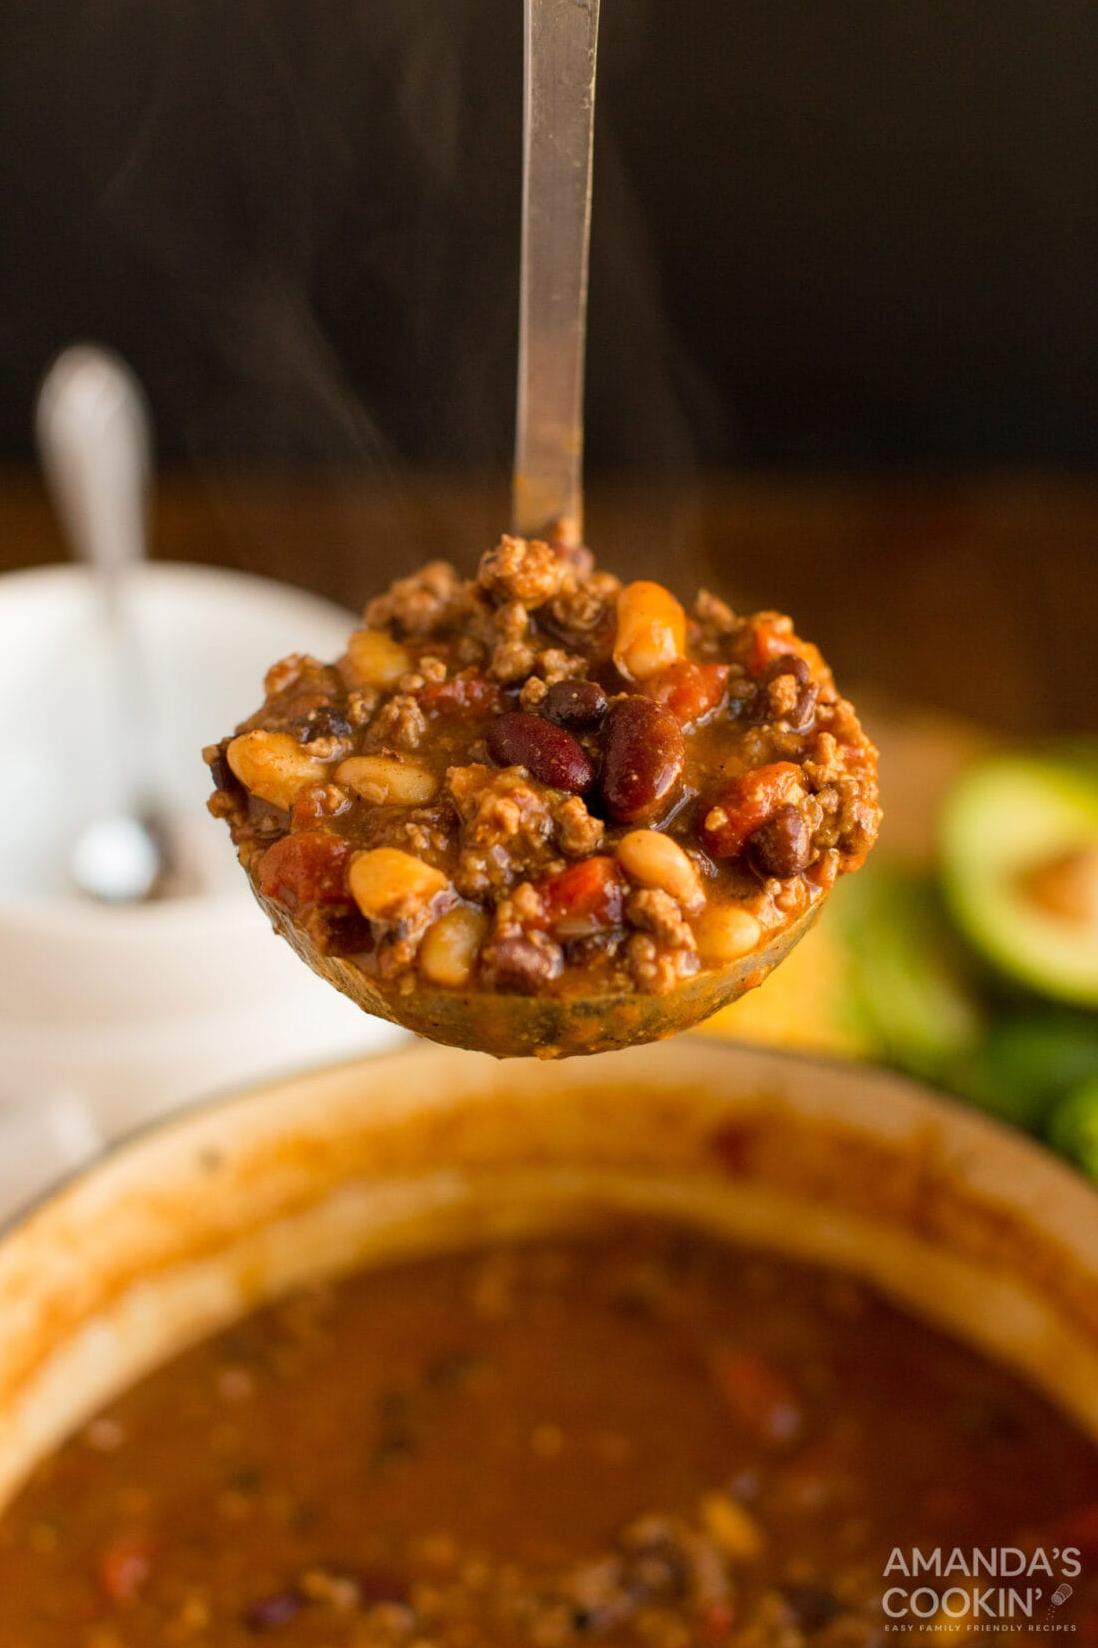  Need a pick-me-up? This chili contains a healthy dose of caffeine from the added coffee.